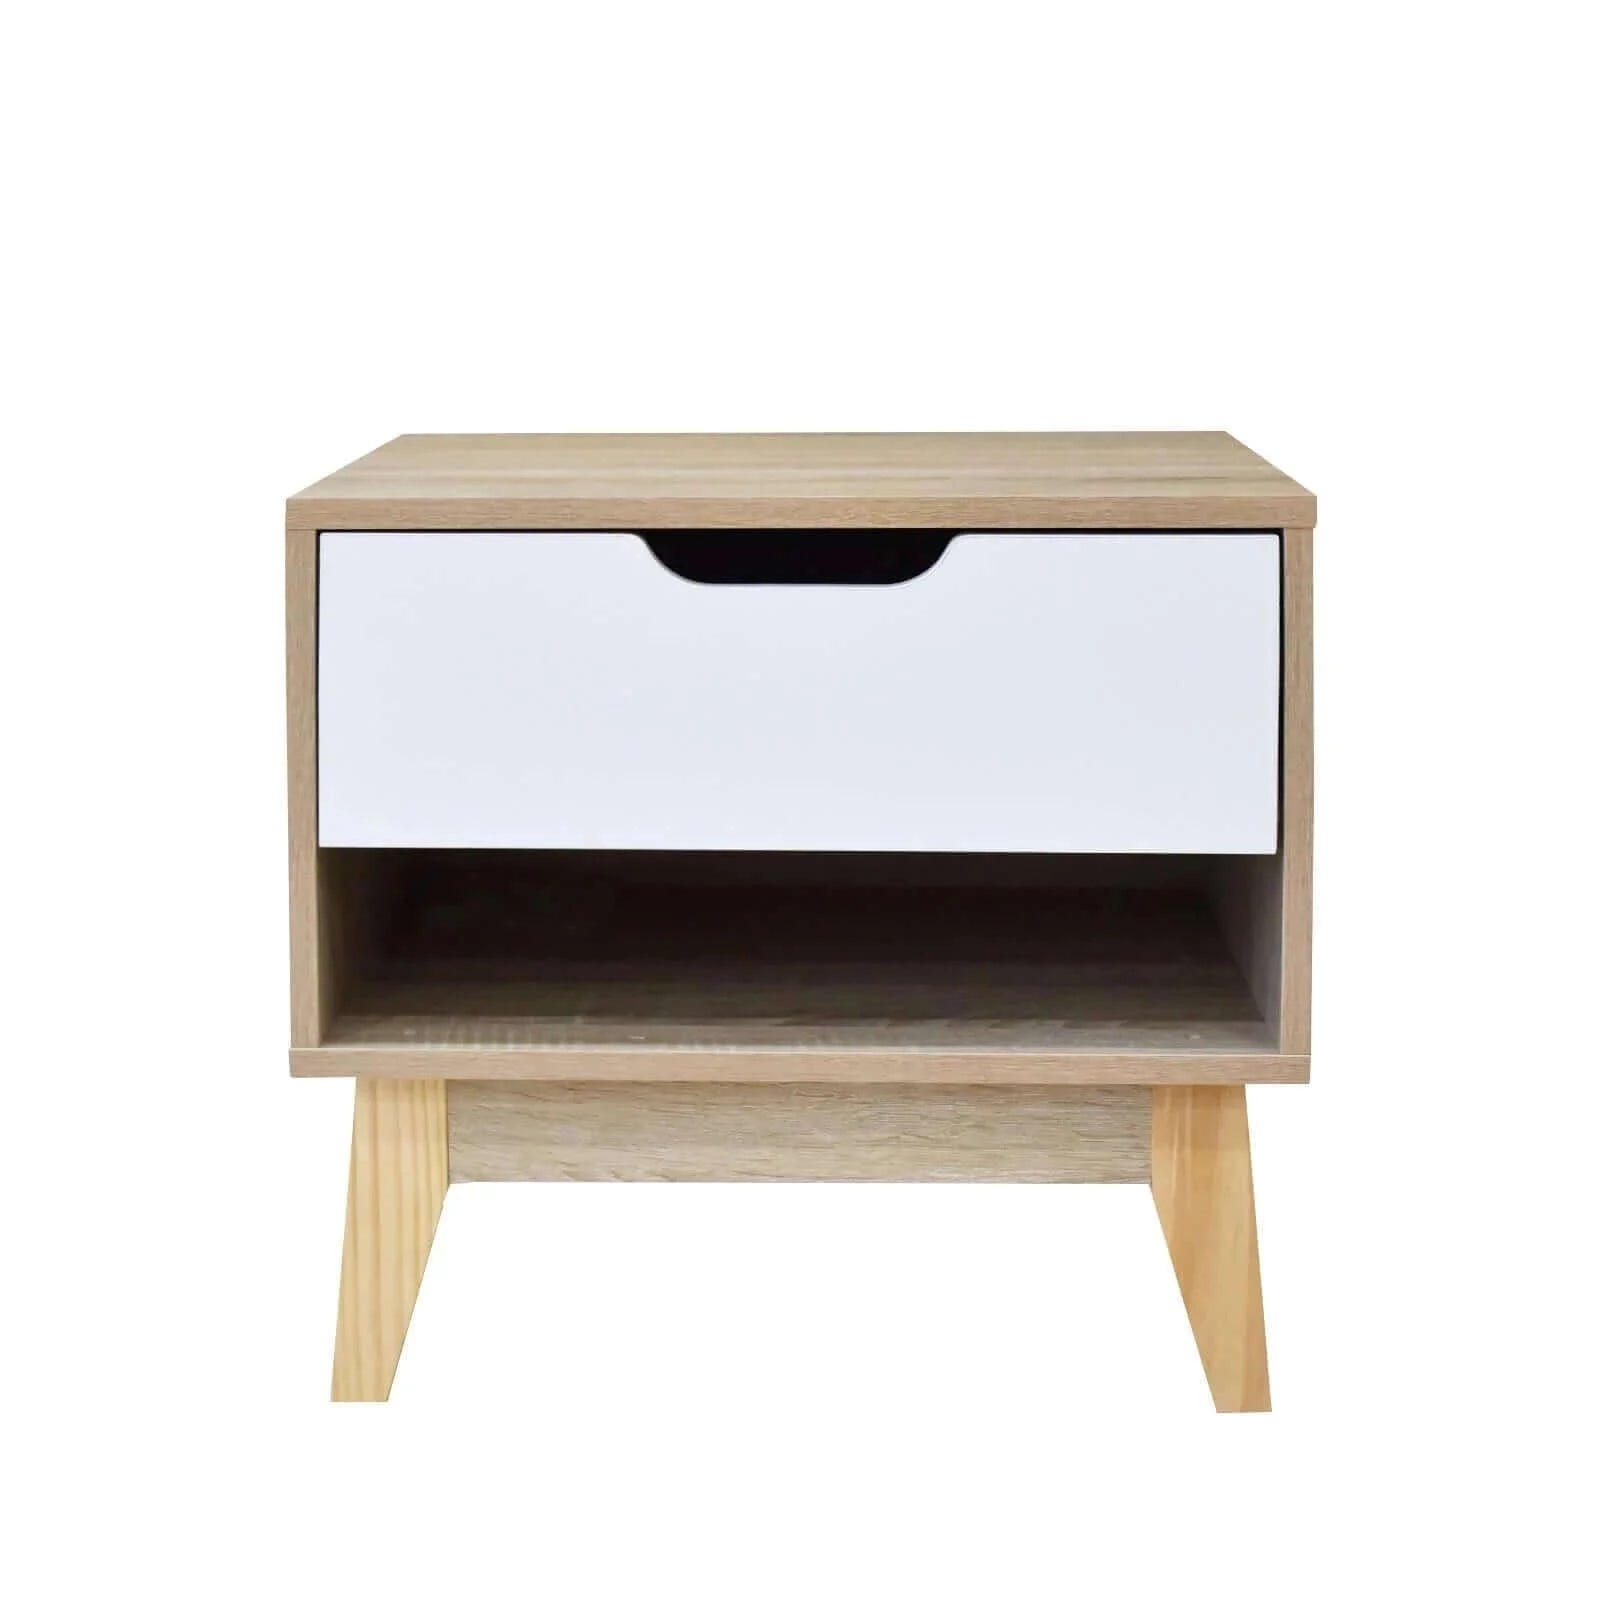 Buy milano decor bedside table manly drawers nightstand unit cabinet storage - upinteriors-Upinteriors